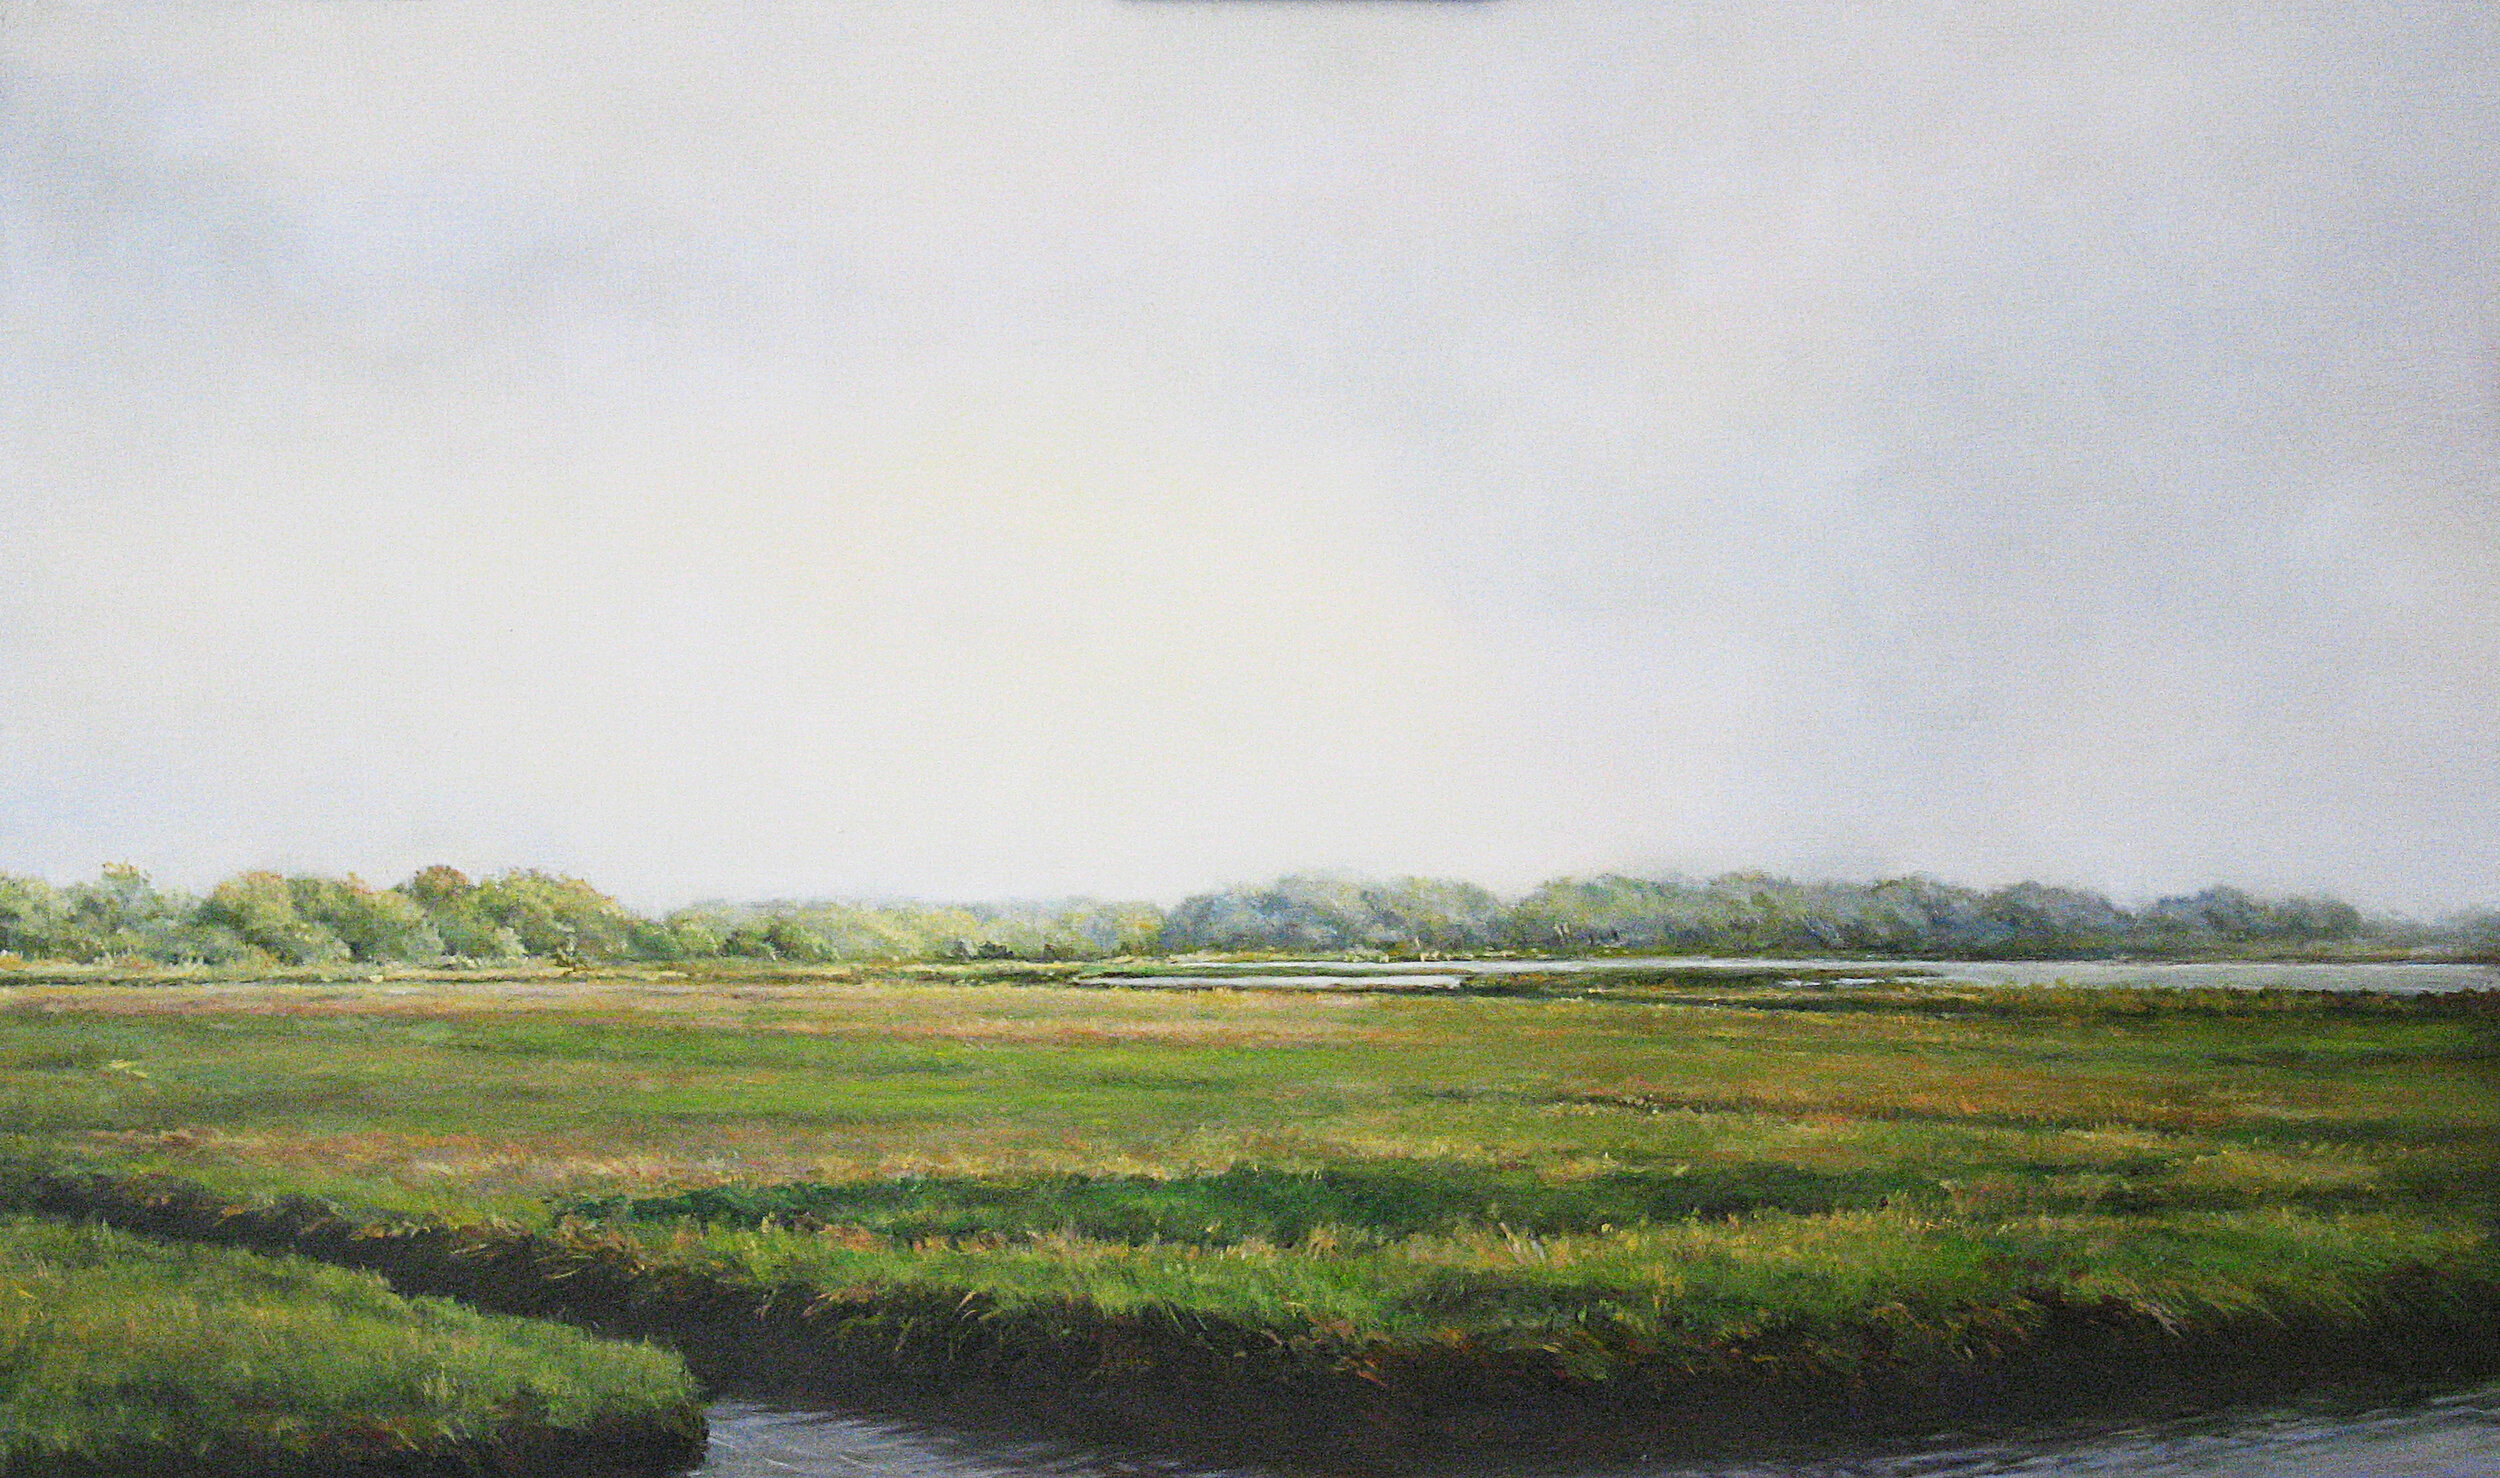  Mary Lou Schempf  Barn Island Salt Marsh Morning,  12” x 20”, oil on board  (private collection)  